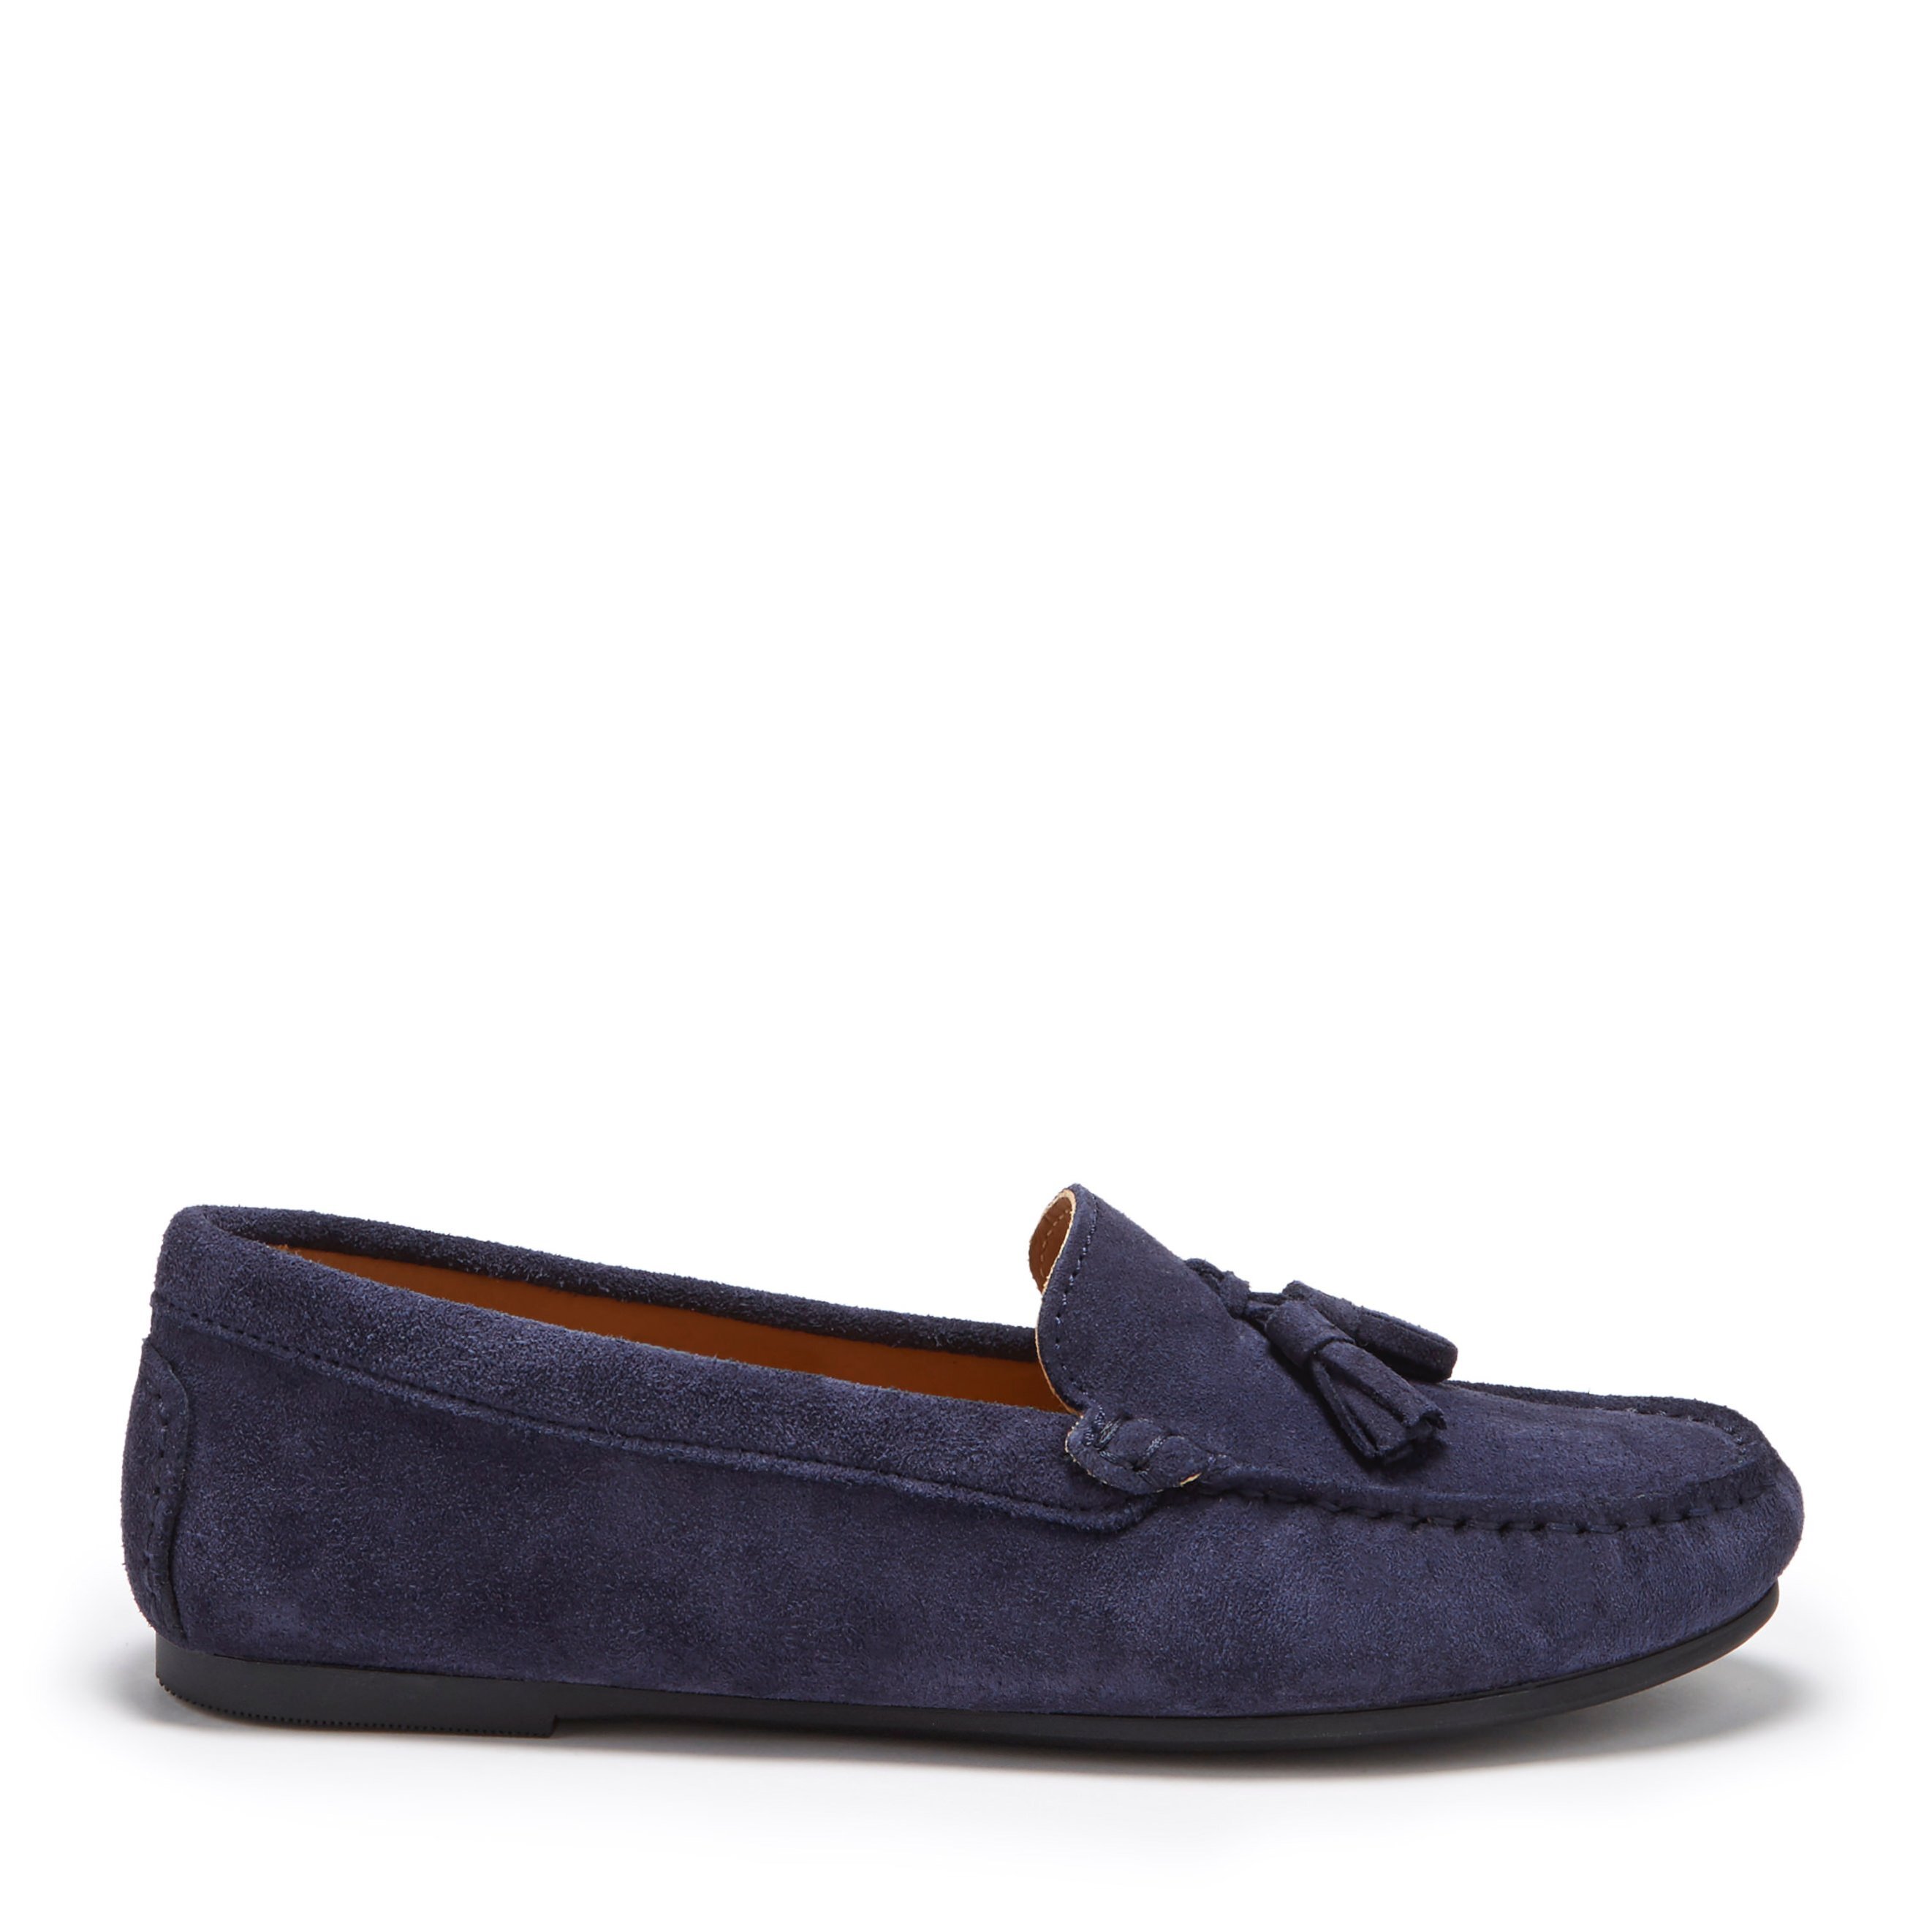 navy blue driving shoes